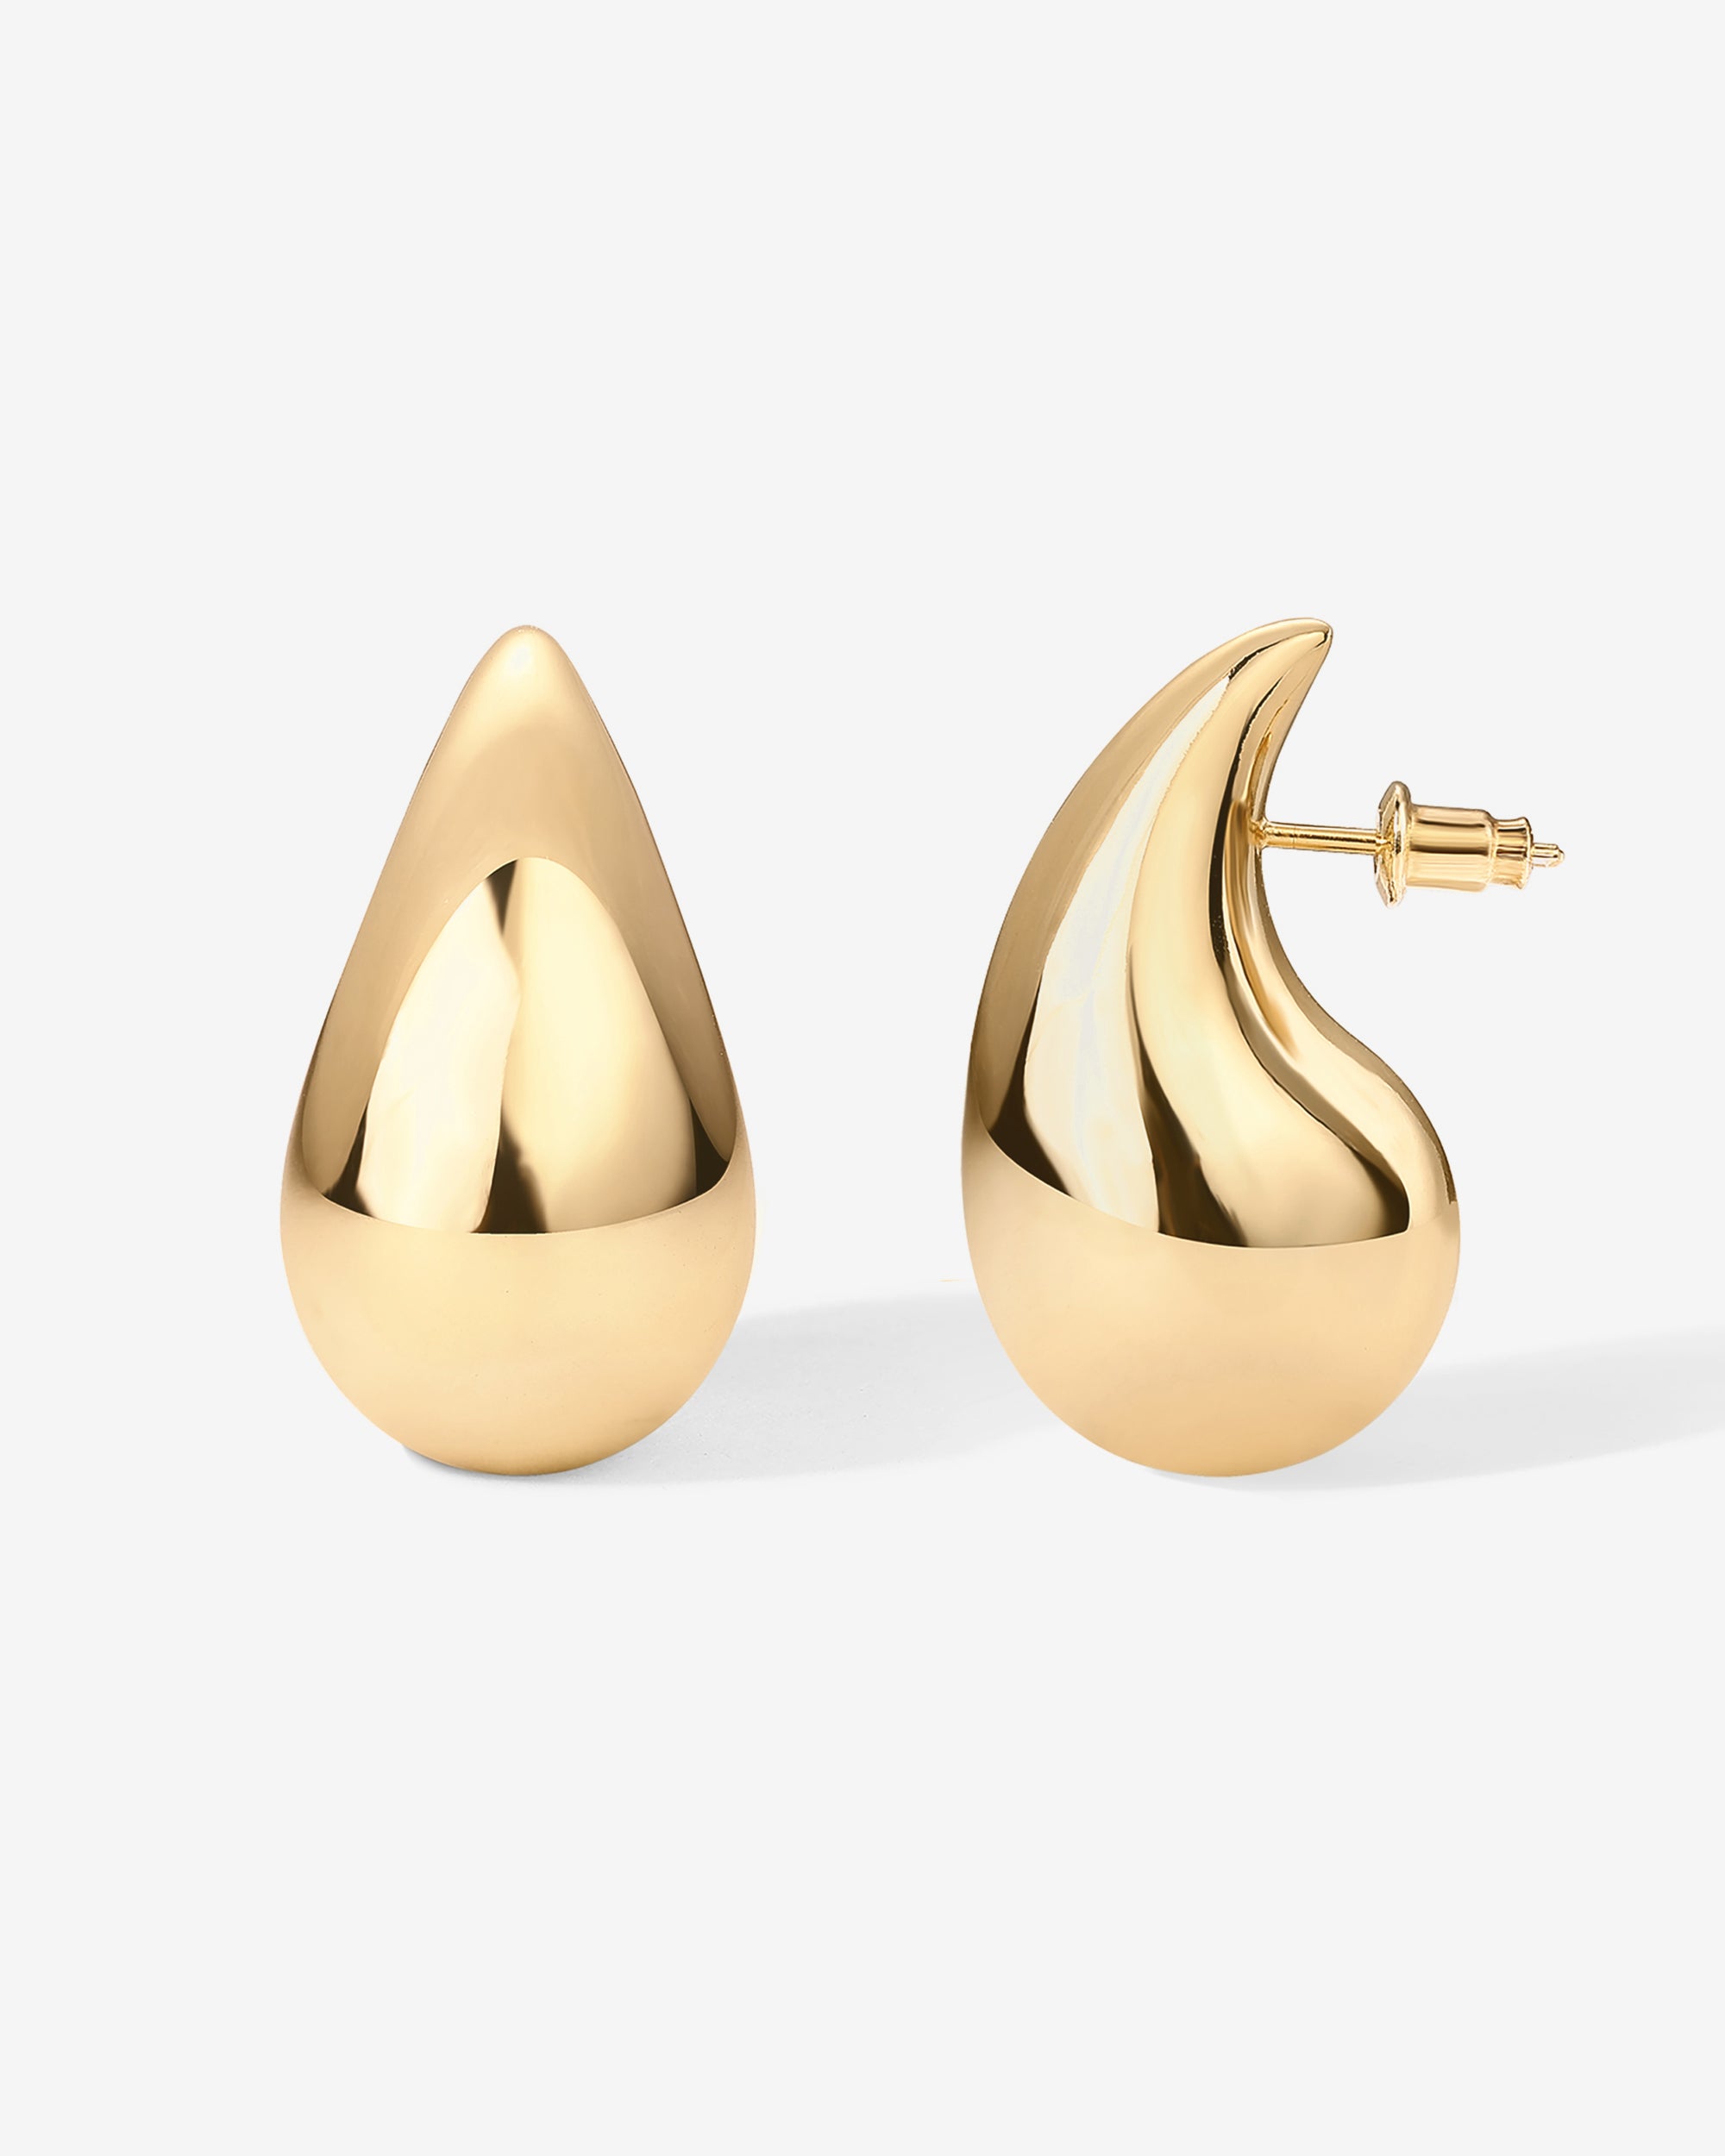 Golden Earrings With Laced Drop Shaped Dangles